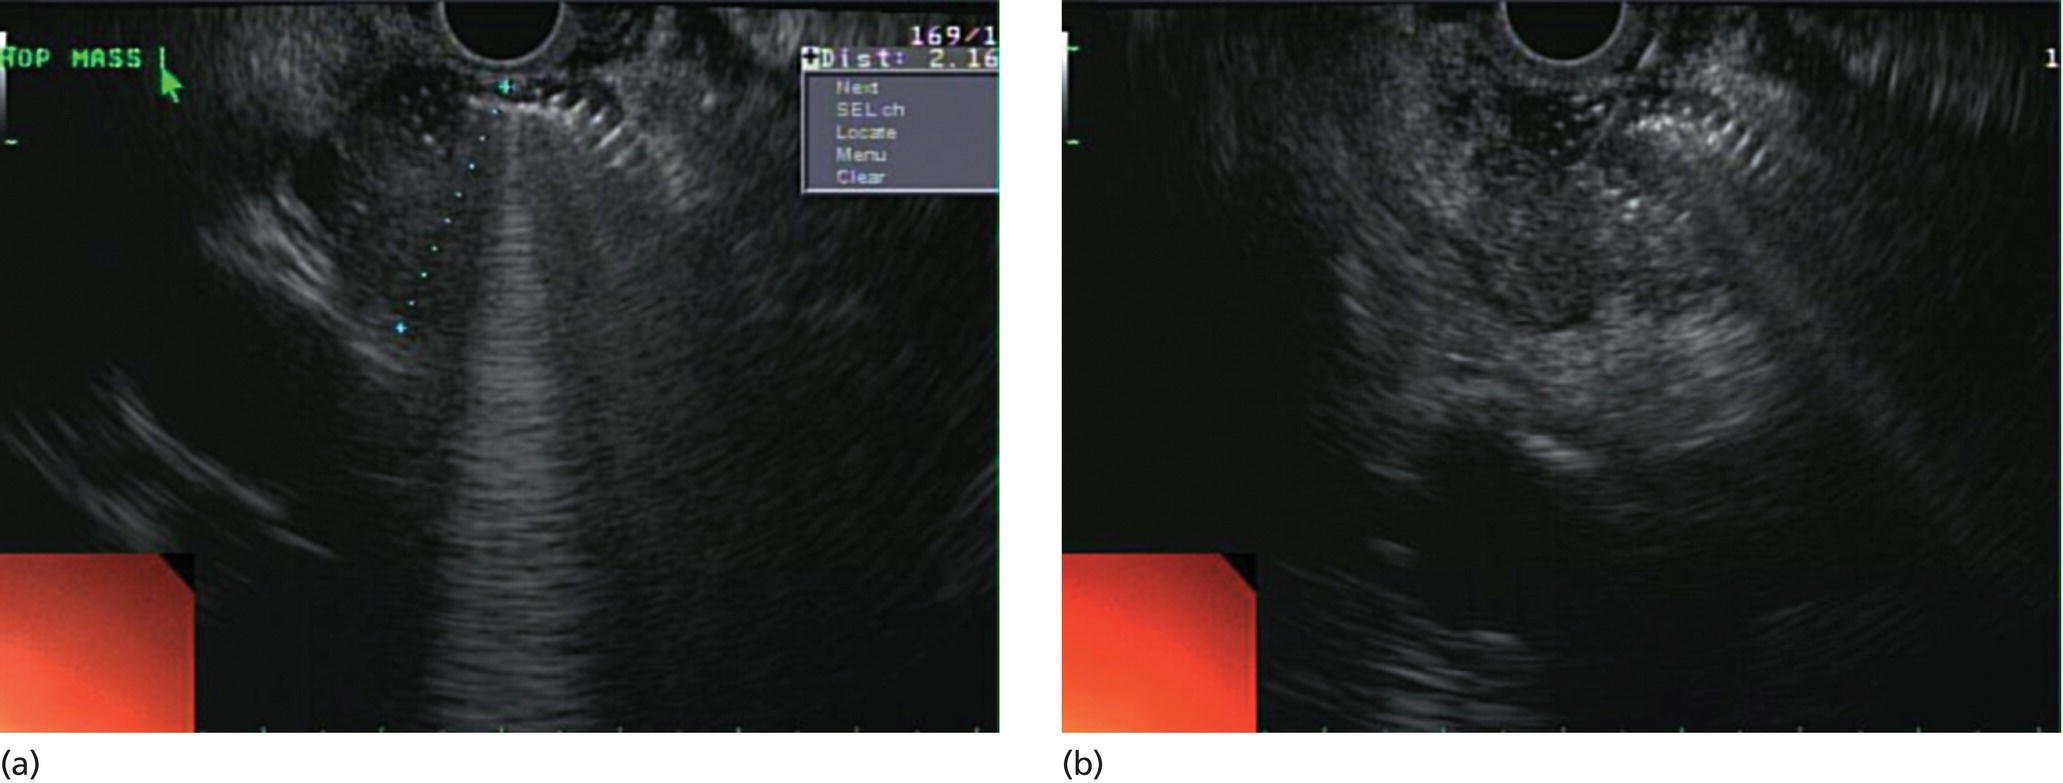 Photos depict (a) A 2-cm mass in the head of pancreas with acoustic interference from a metal stent within the common bile duct. (b) Fine needle aspiration through the metal stent to sample tissue from the inferior portion of the mass.